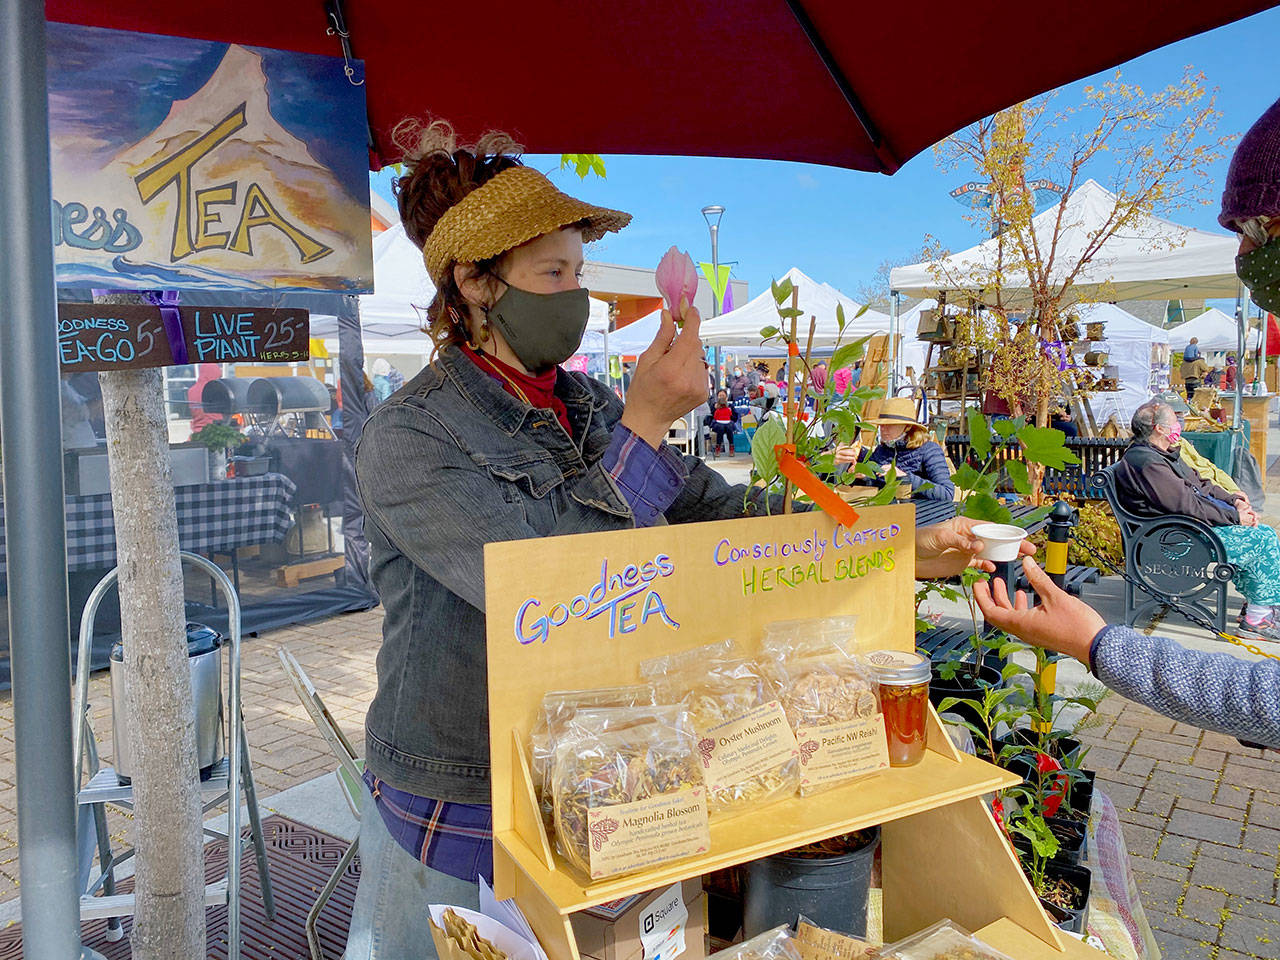 Shaelee Evans helps a customer at the Goodness Tea booth on May 1, the opening day of the market’s 2021 season. Photo by Emma Jane Garcia/Sequim Farmers & Artisans Market